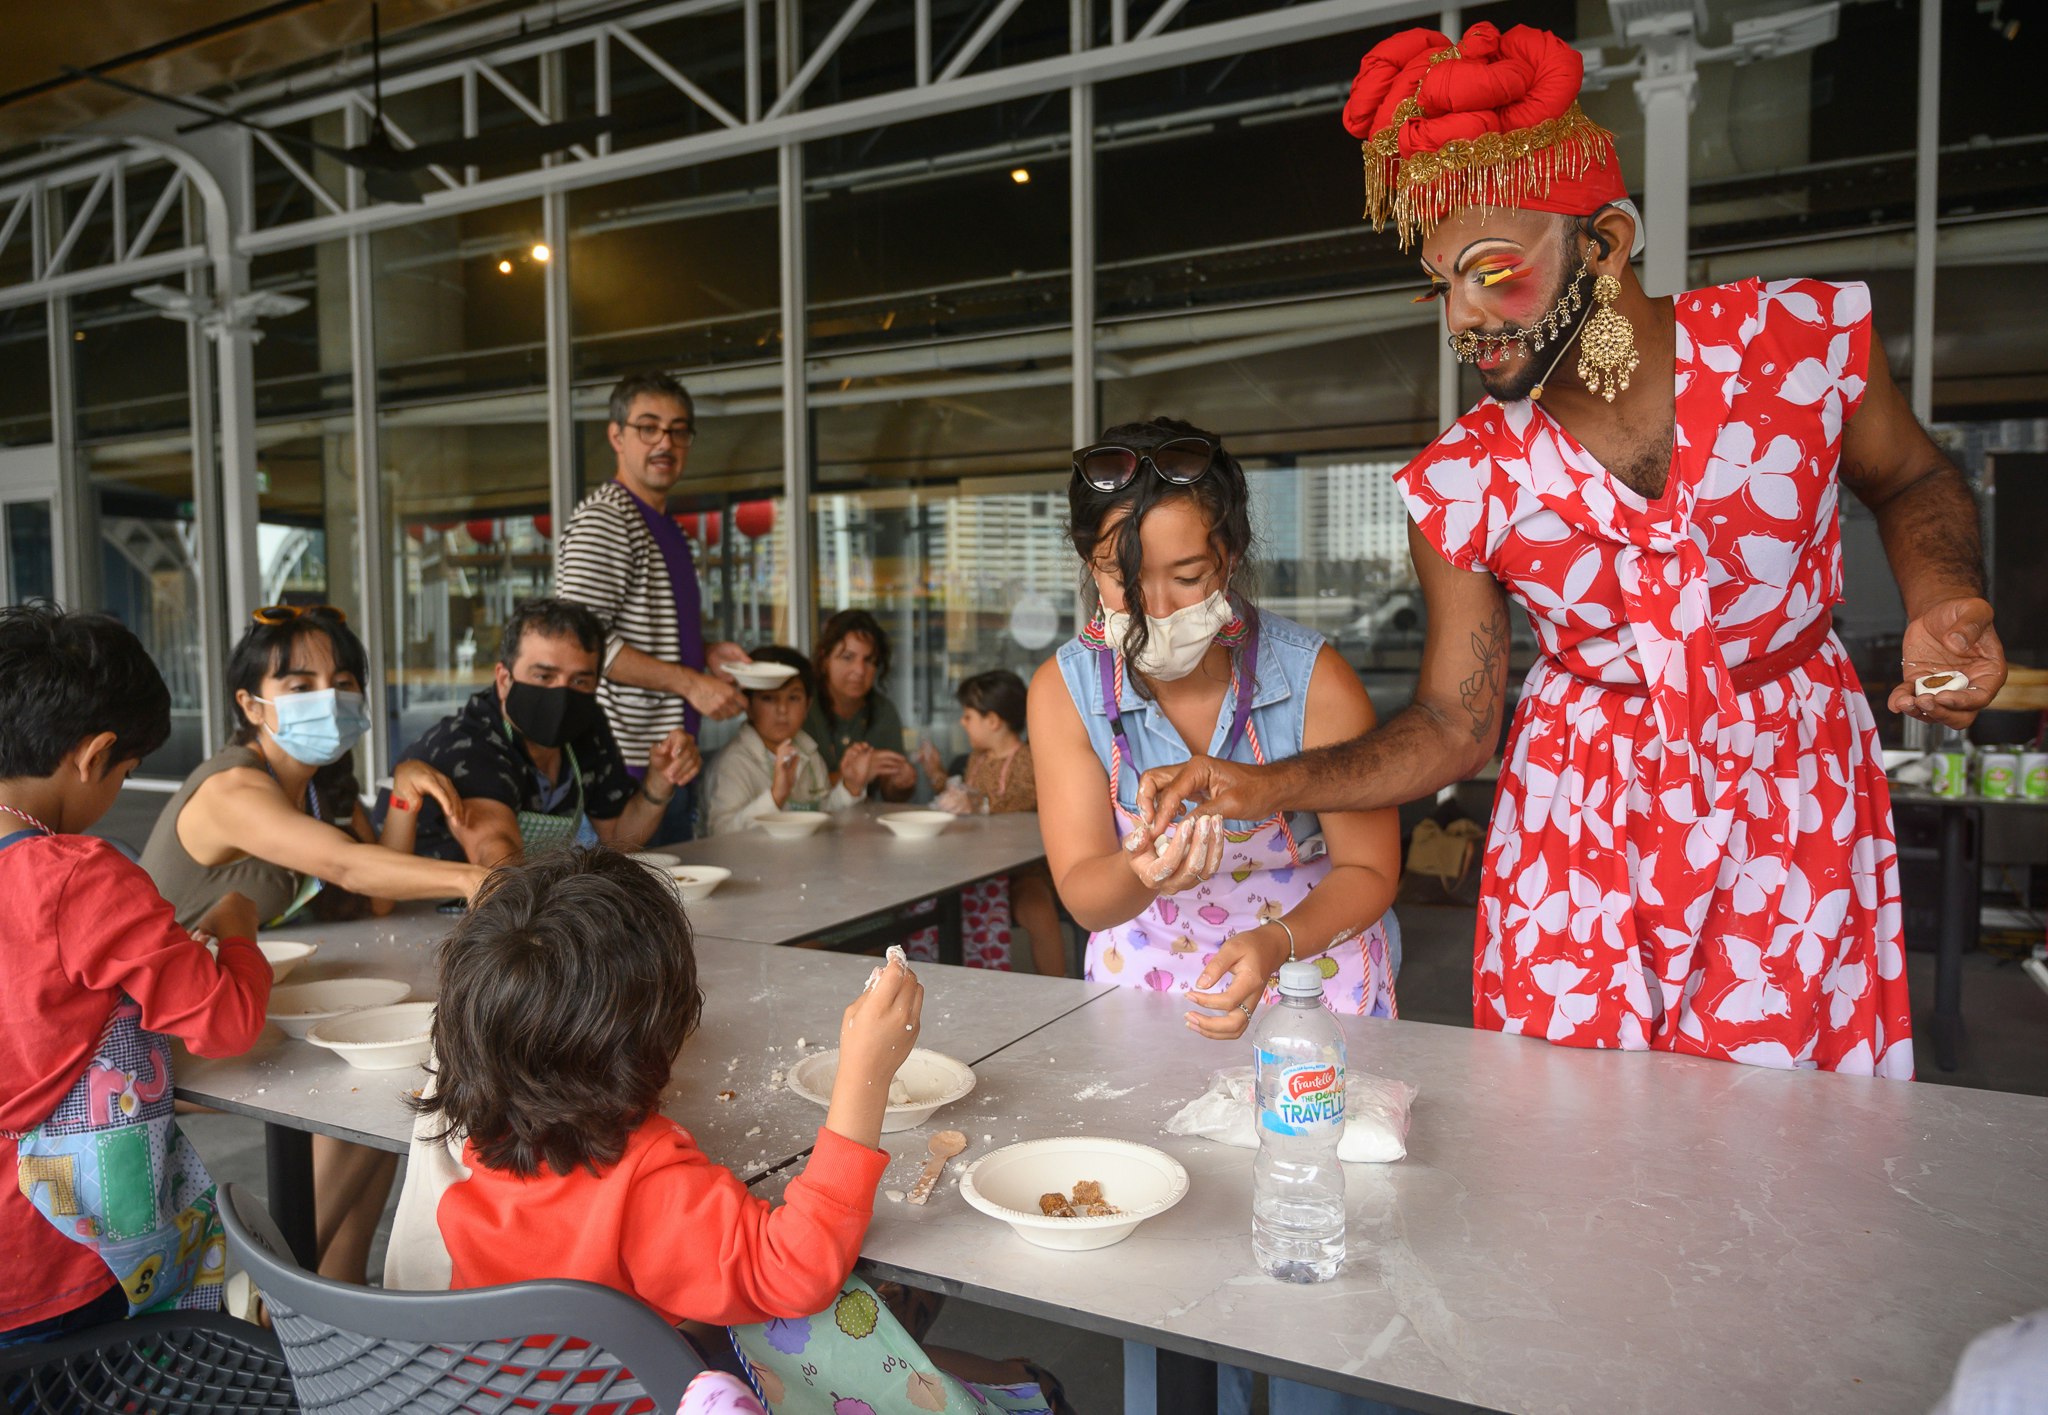 Radha, a South Asian drag performer, wears a red floral dress and a red headscarf while helping children make snacks.